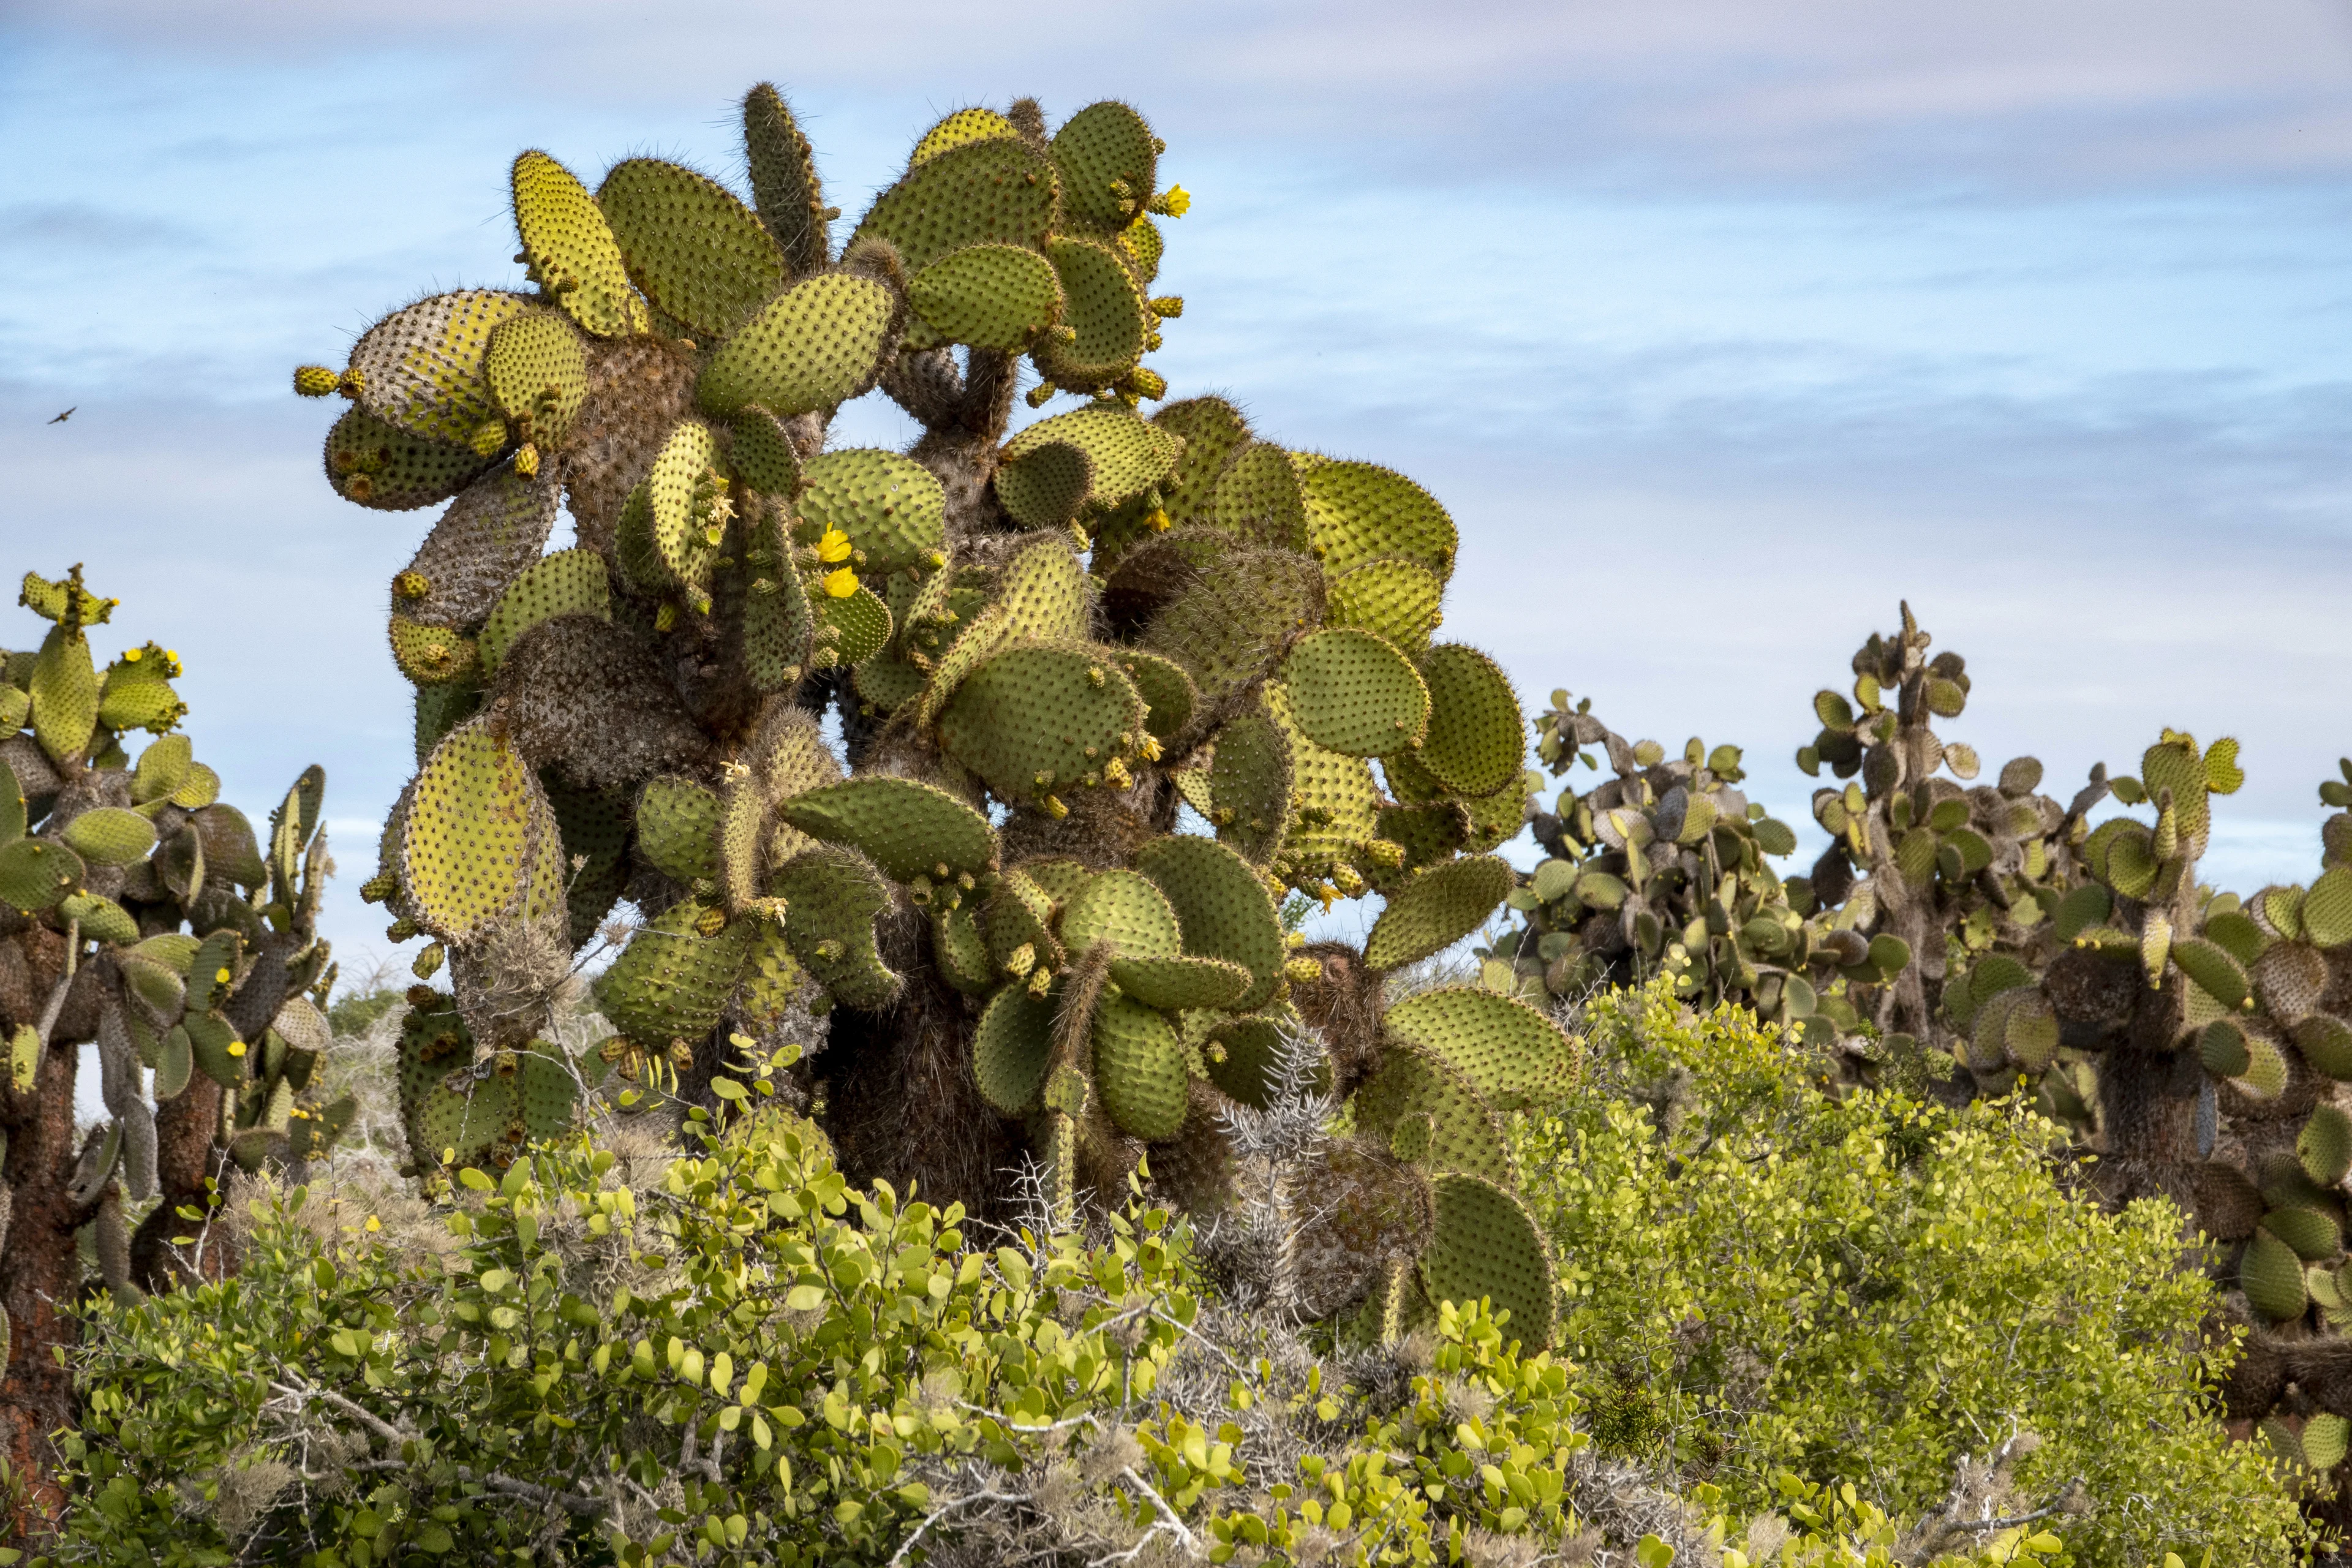 Cactuses at the Galapagos Islands. Photo: Andrea Klaussner